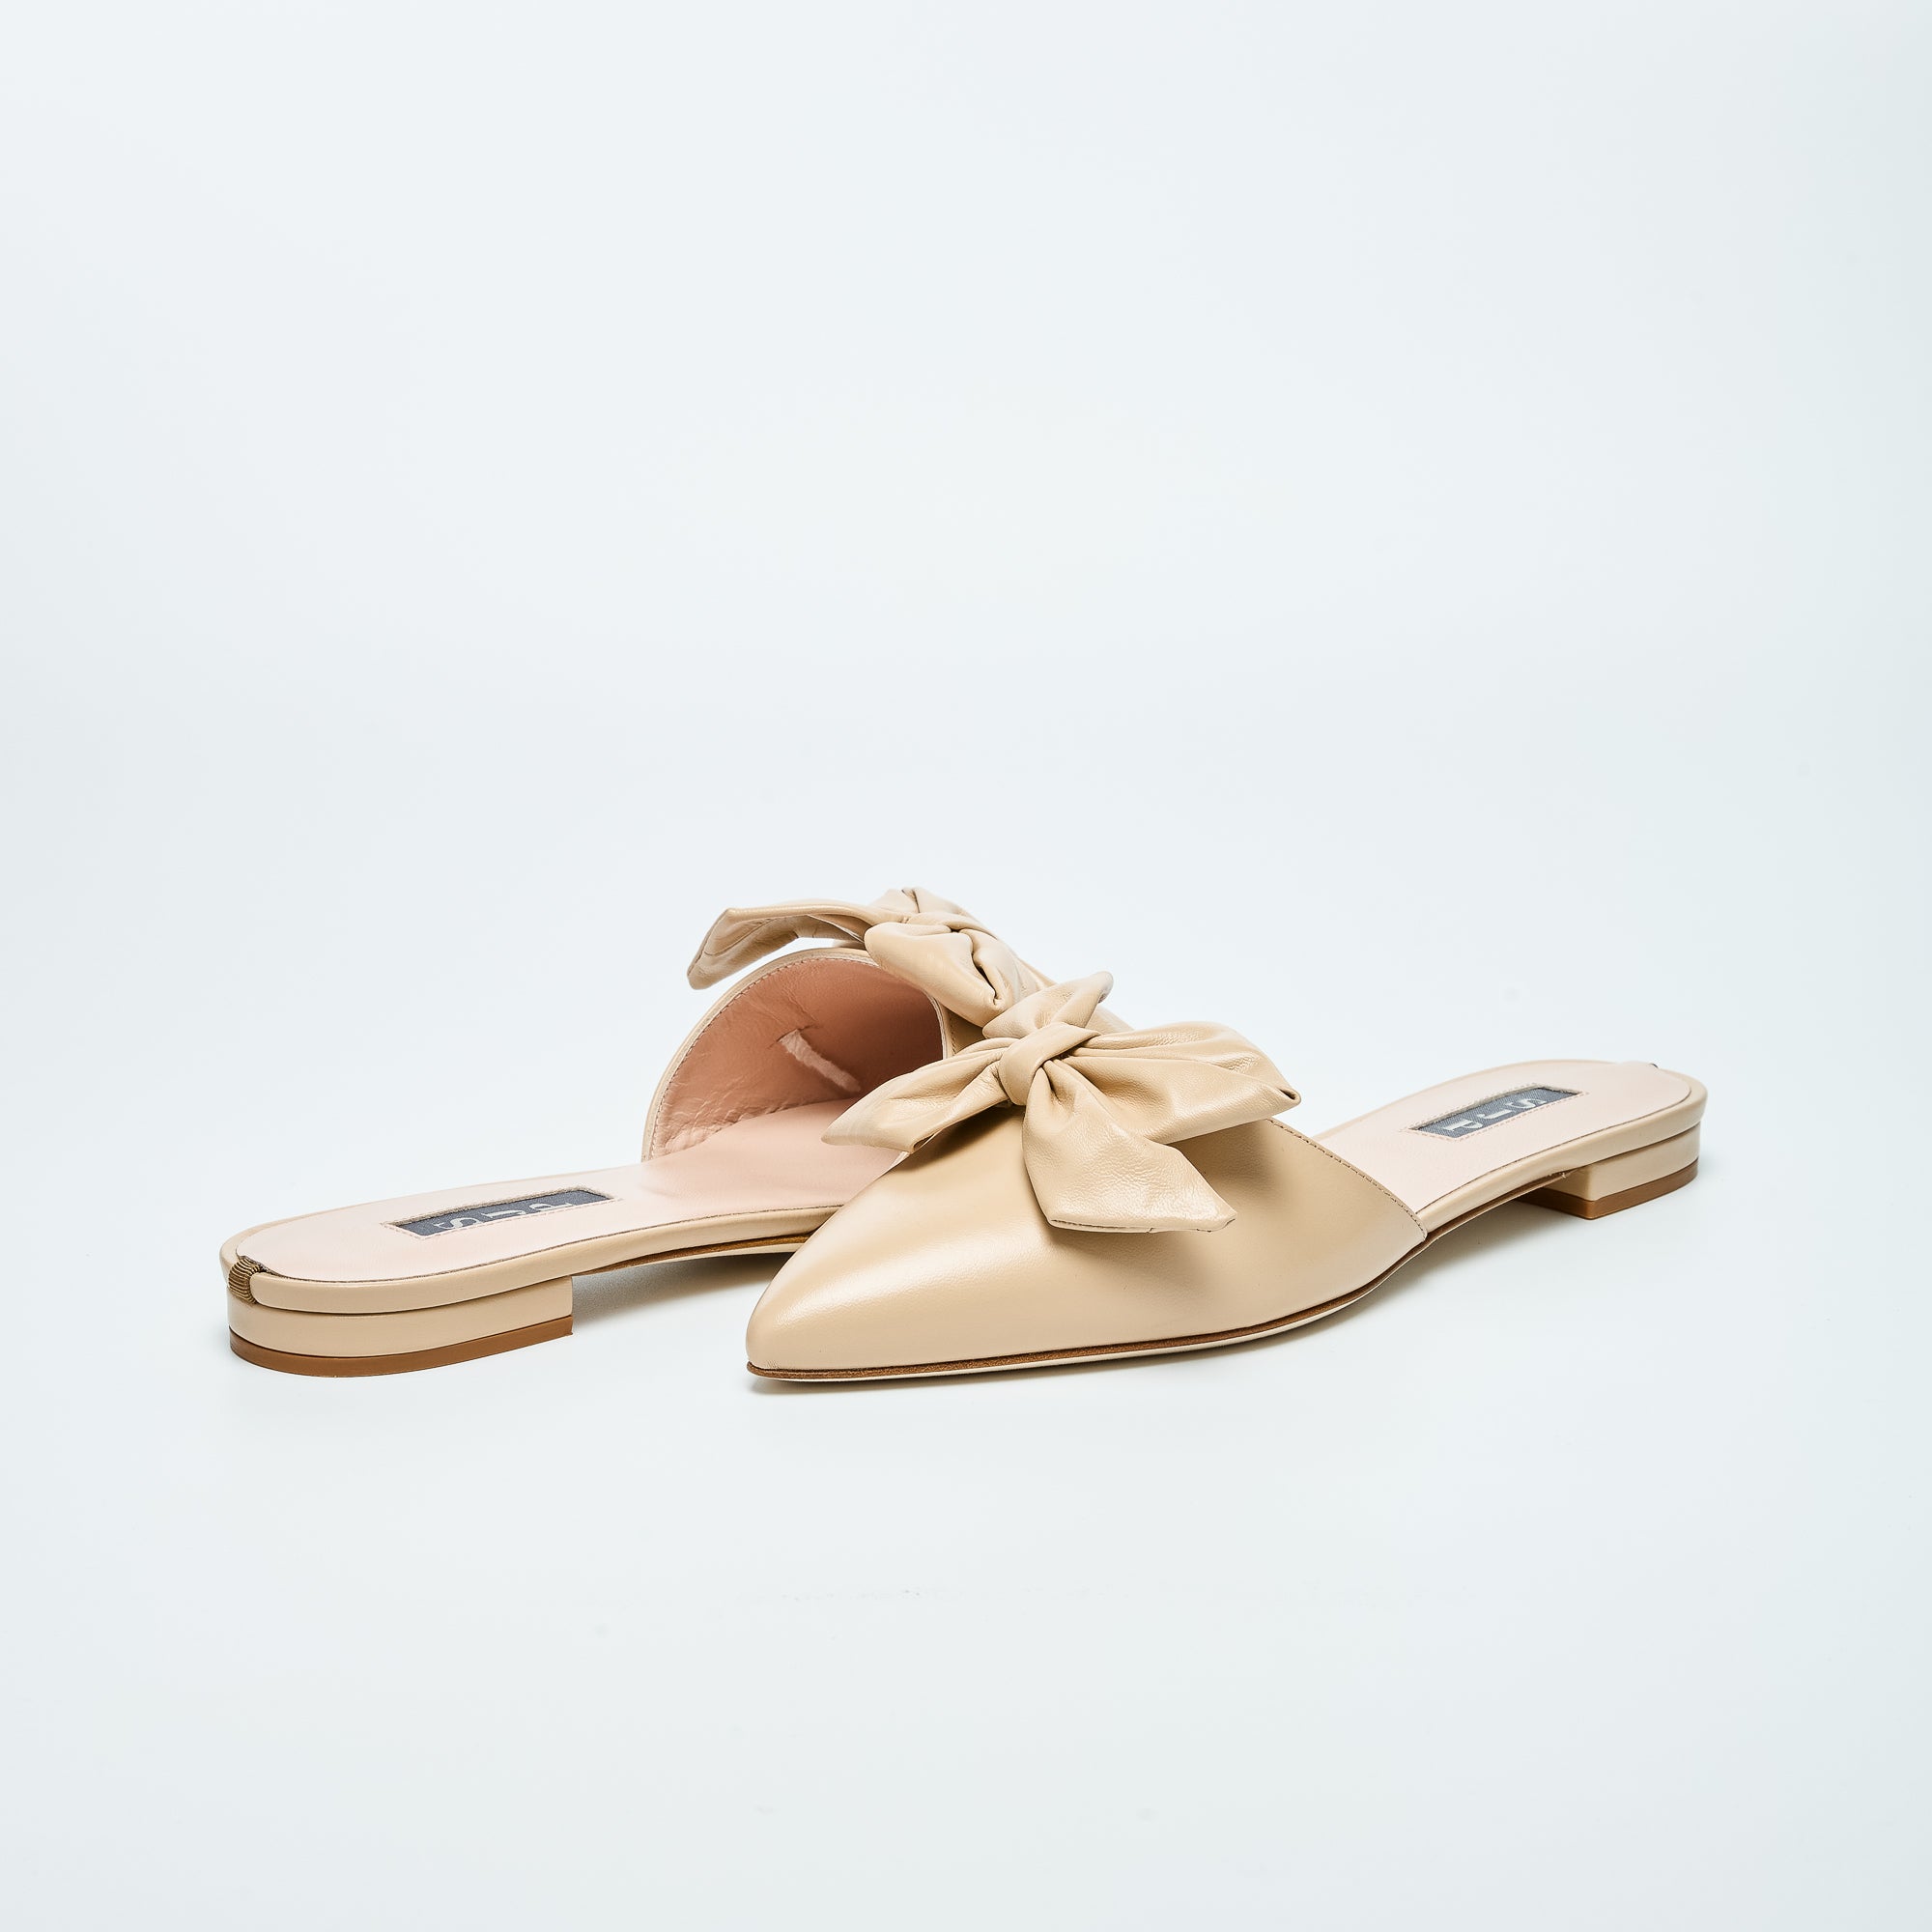 SJP by Sarah Jessica Parker Mento Nude Leather Mules 10mm